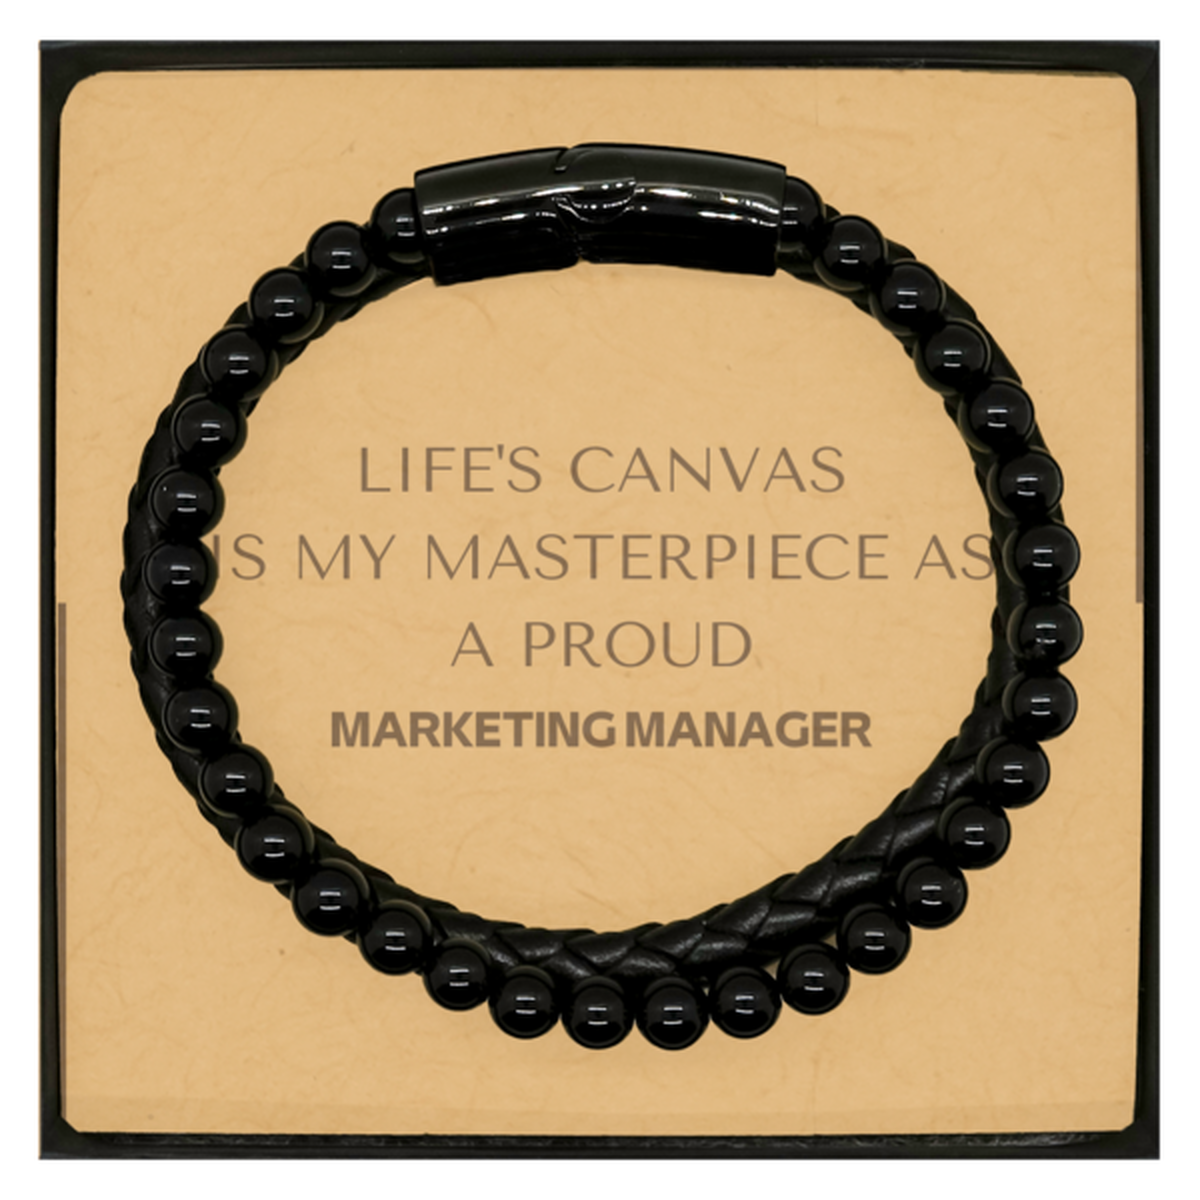 Proud Marketing Manager Gifts, Life's canvas is my masterpiece, Epic Birthday Christmas Unique Stone Leather Bracelets For Marketing Manager, Coworkers, Men, Women, Friends